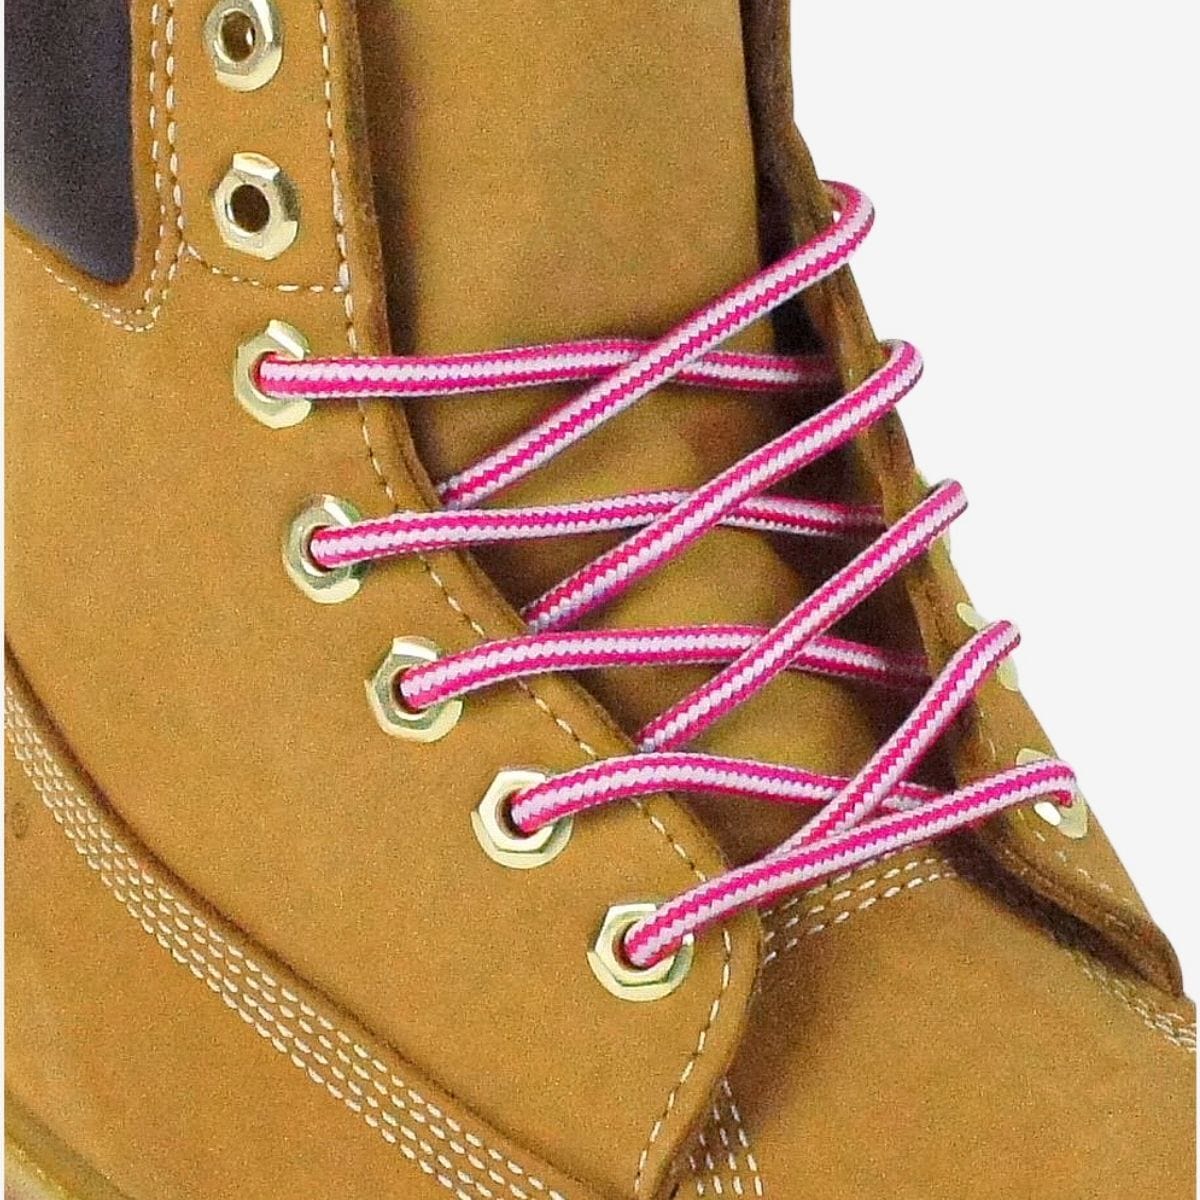 shop-round-shoelaces-online-in-pink-and-white-for-boots-sneakers-and-running-shoes